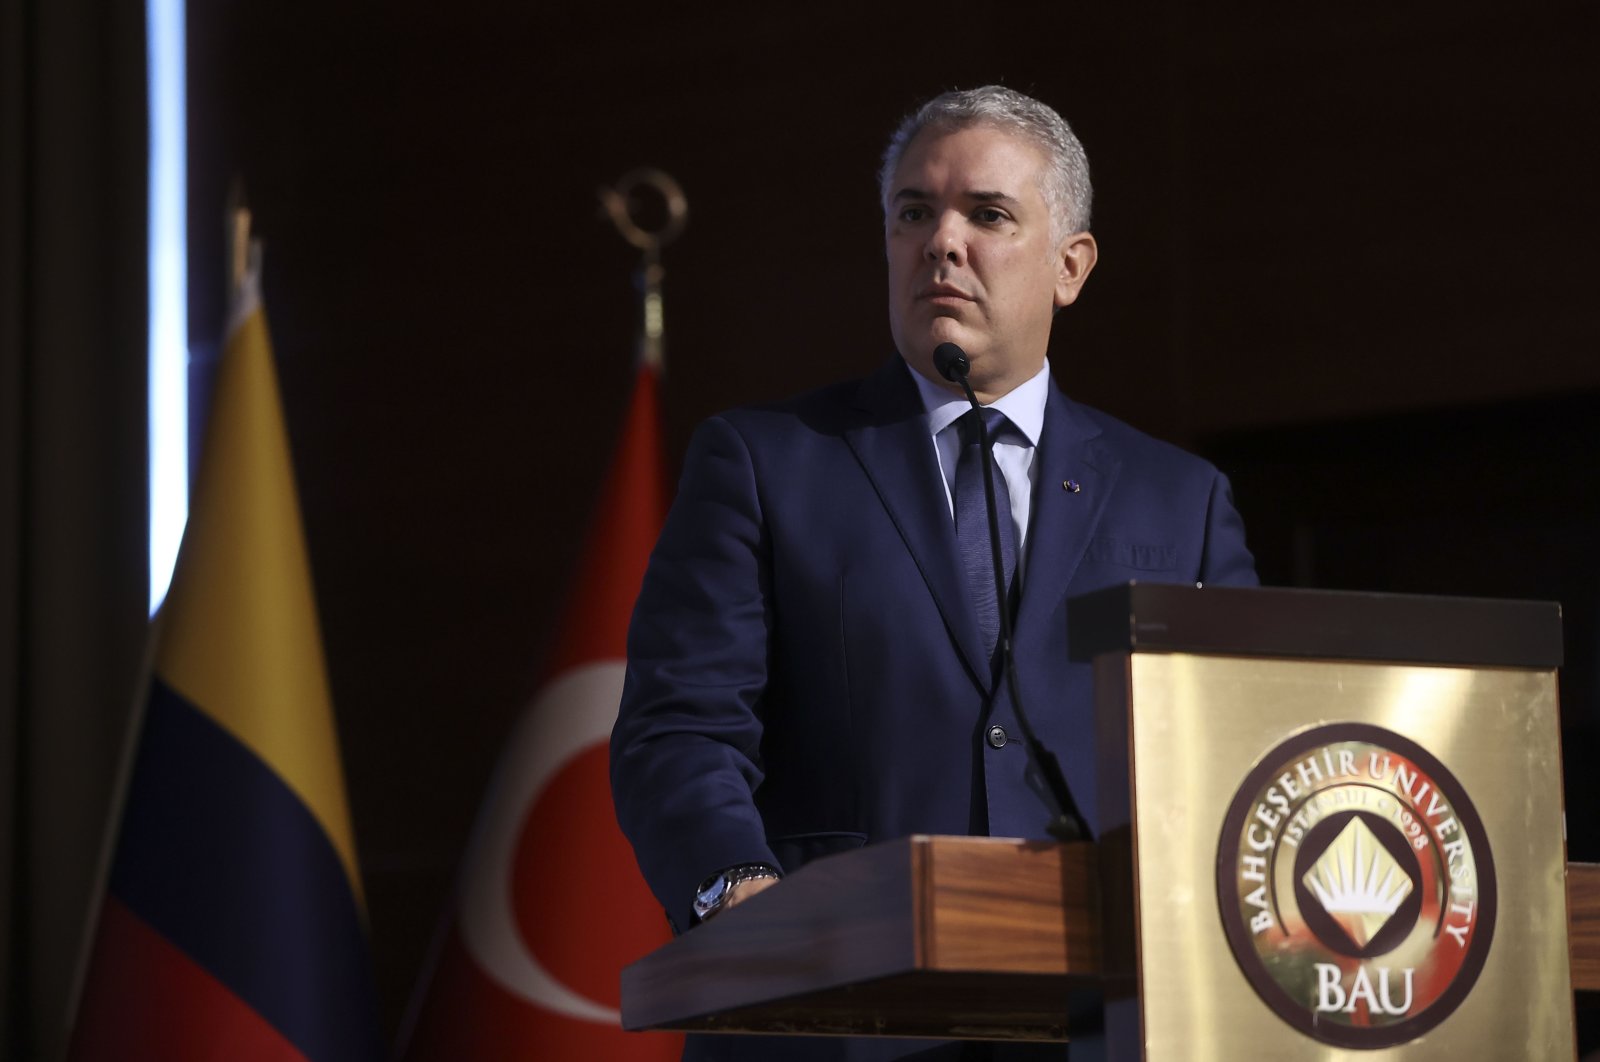 Colombian President Duque expresses 'deep admiration' for Atatürk